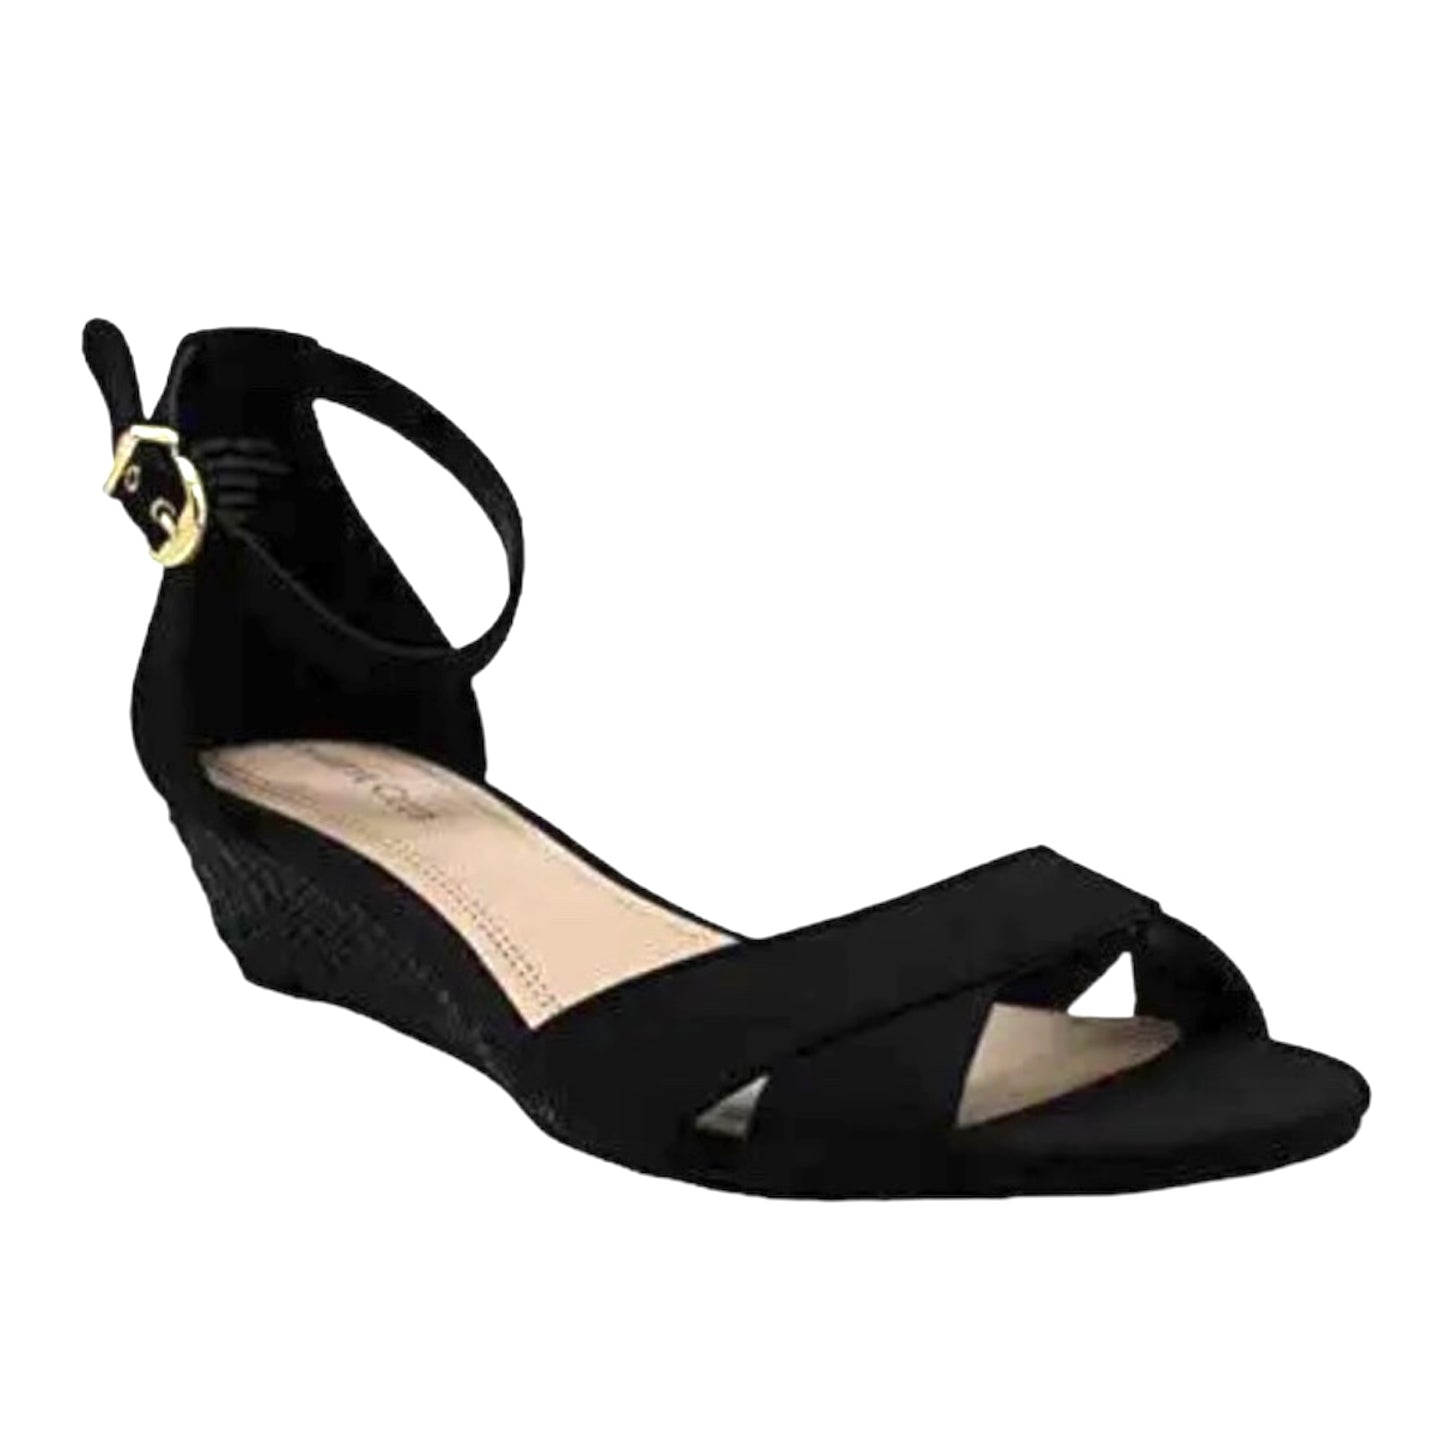 Gippi Black Size 11M Ankle Strap Women's Wedge Sandals